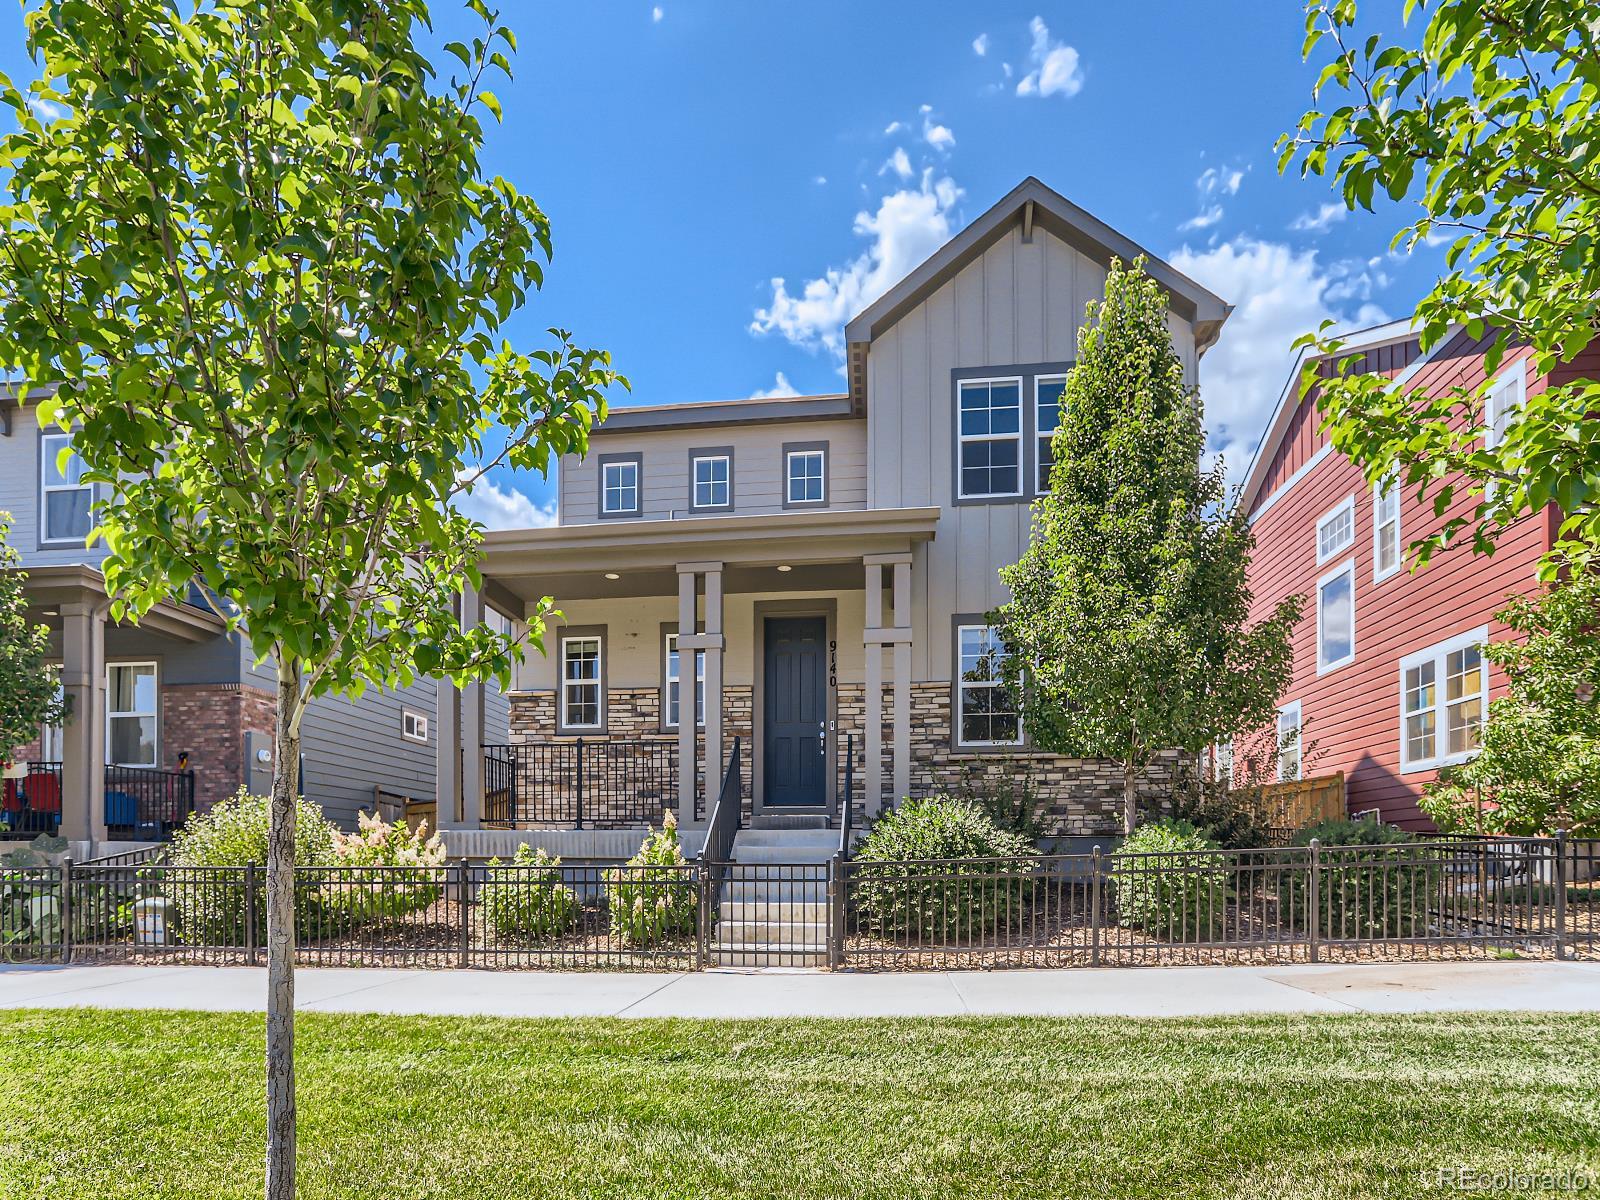 Report Image for 9140 W 100th Way,Westminster, Colorado